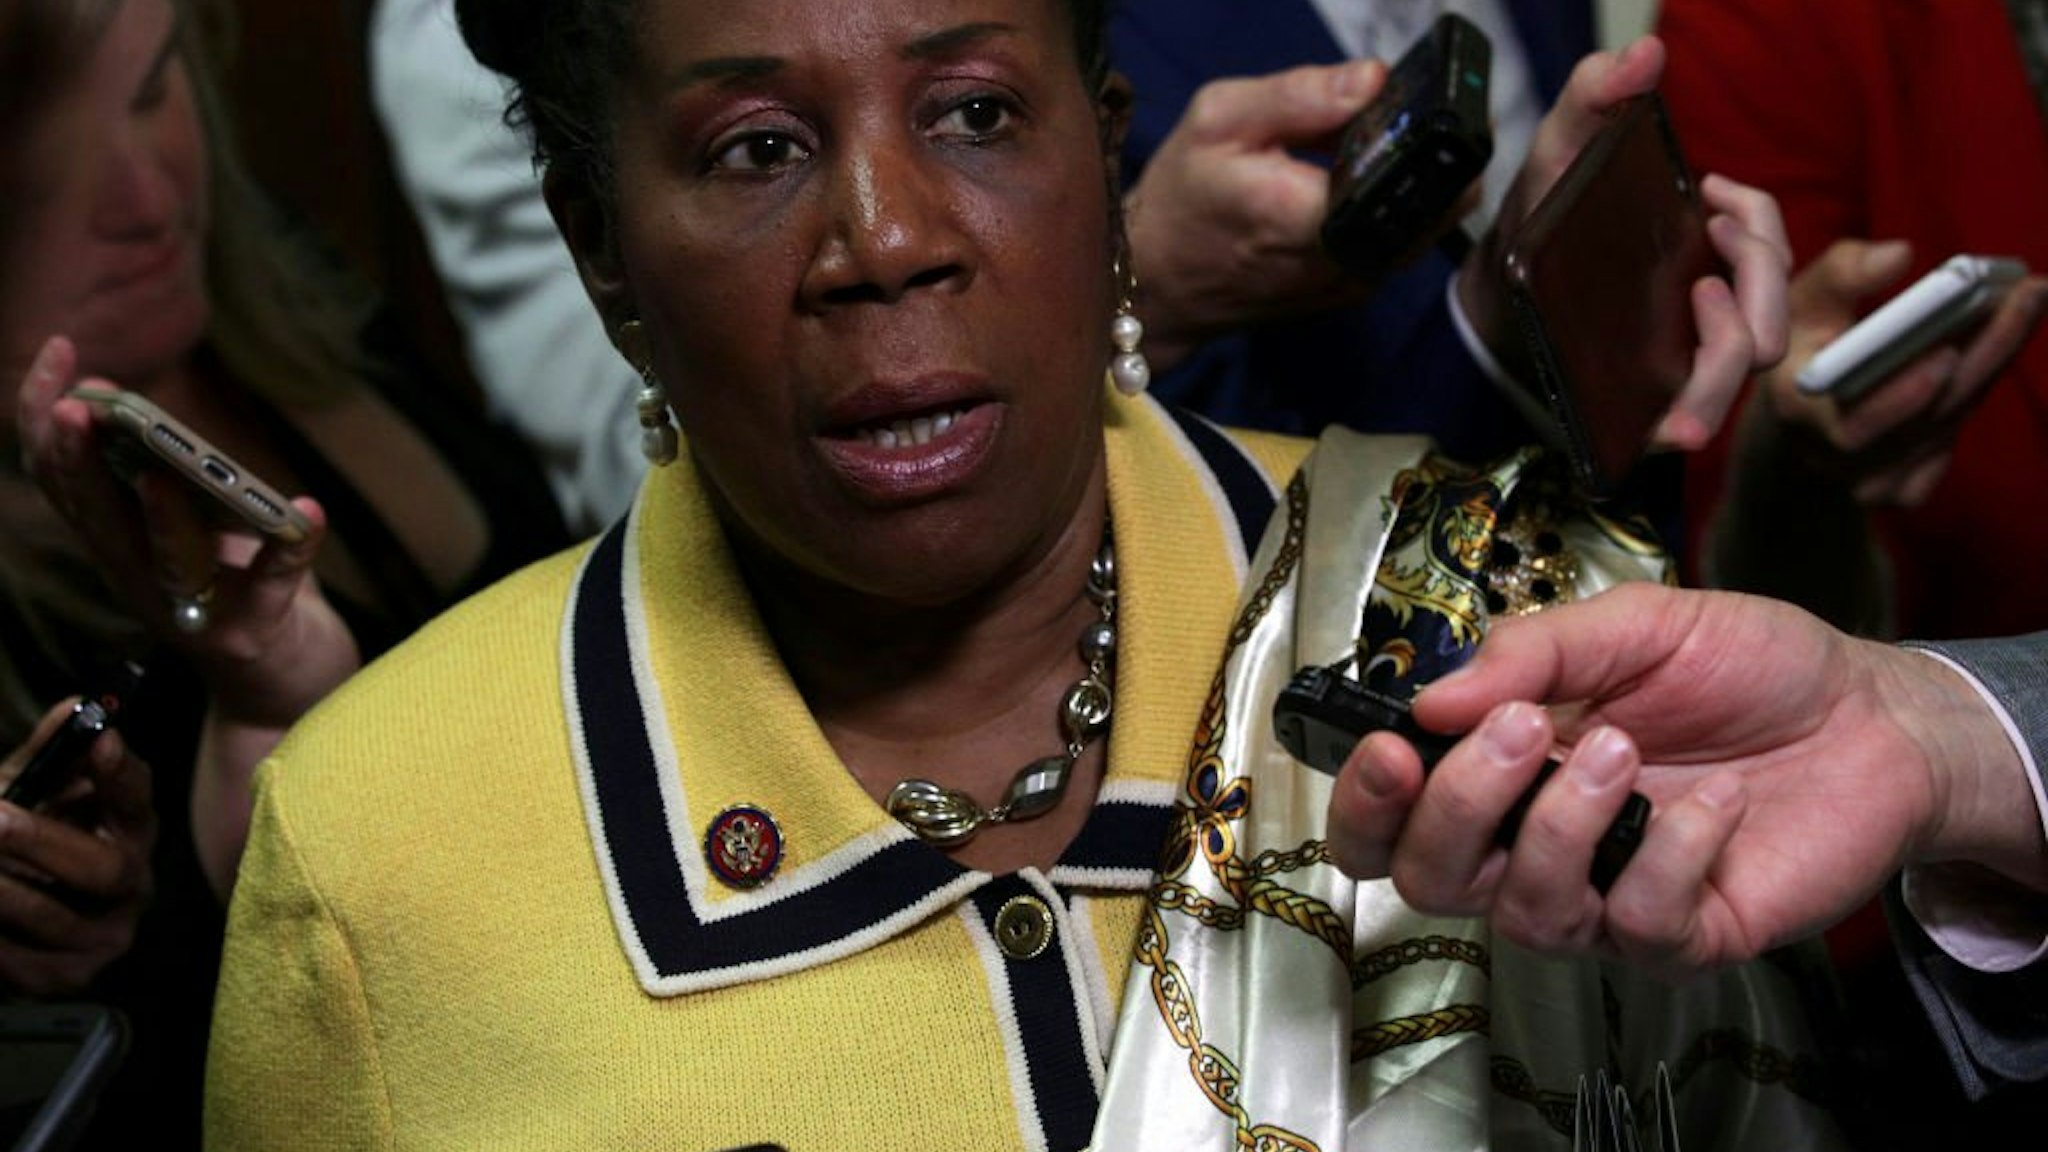 Rep. Sheila Jackson Lee speaks to members of the media outside the room where former White House communications director Hope Hicks testified at a closed-door interview with the House Judiciary Committee June 19, 2019 on Capitol Hill in Washington, DC.